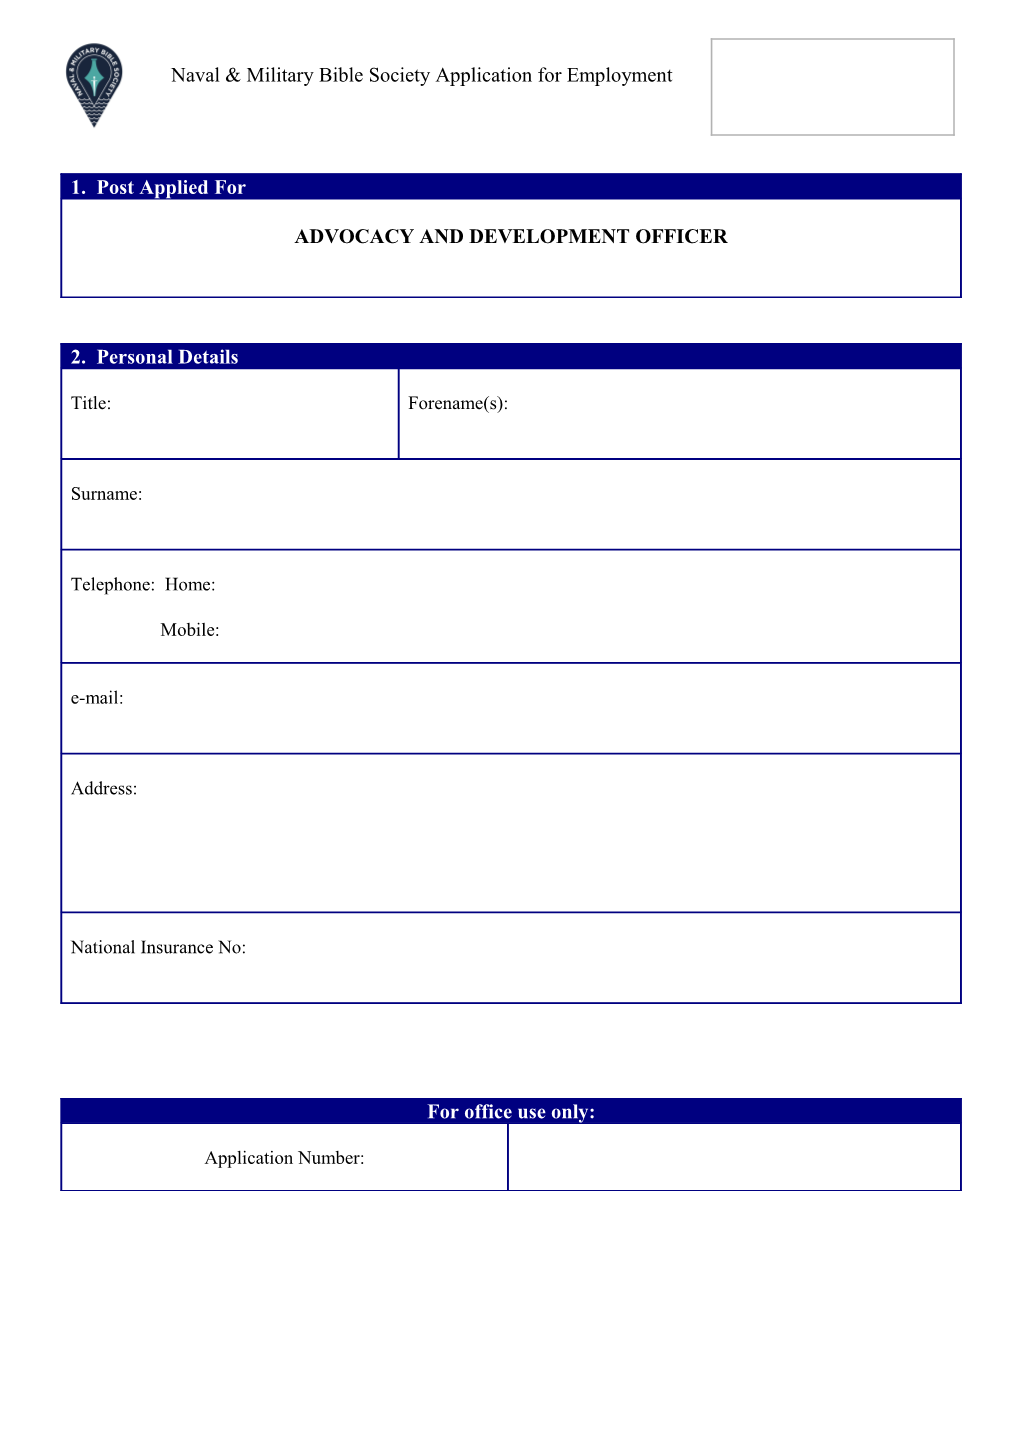 Application for Employment s133